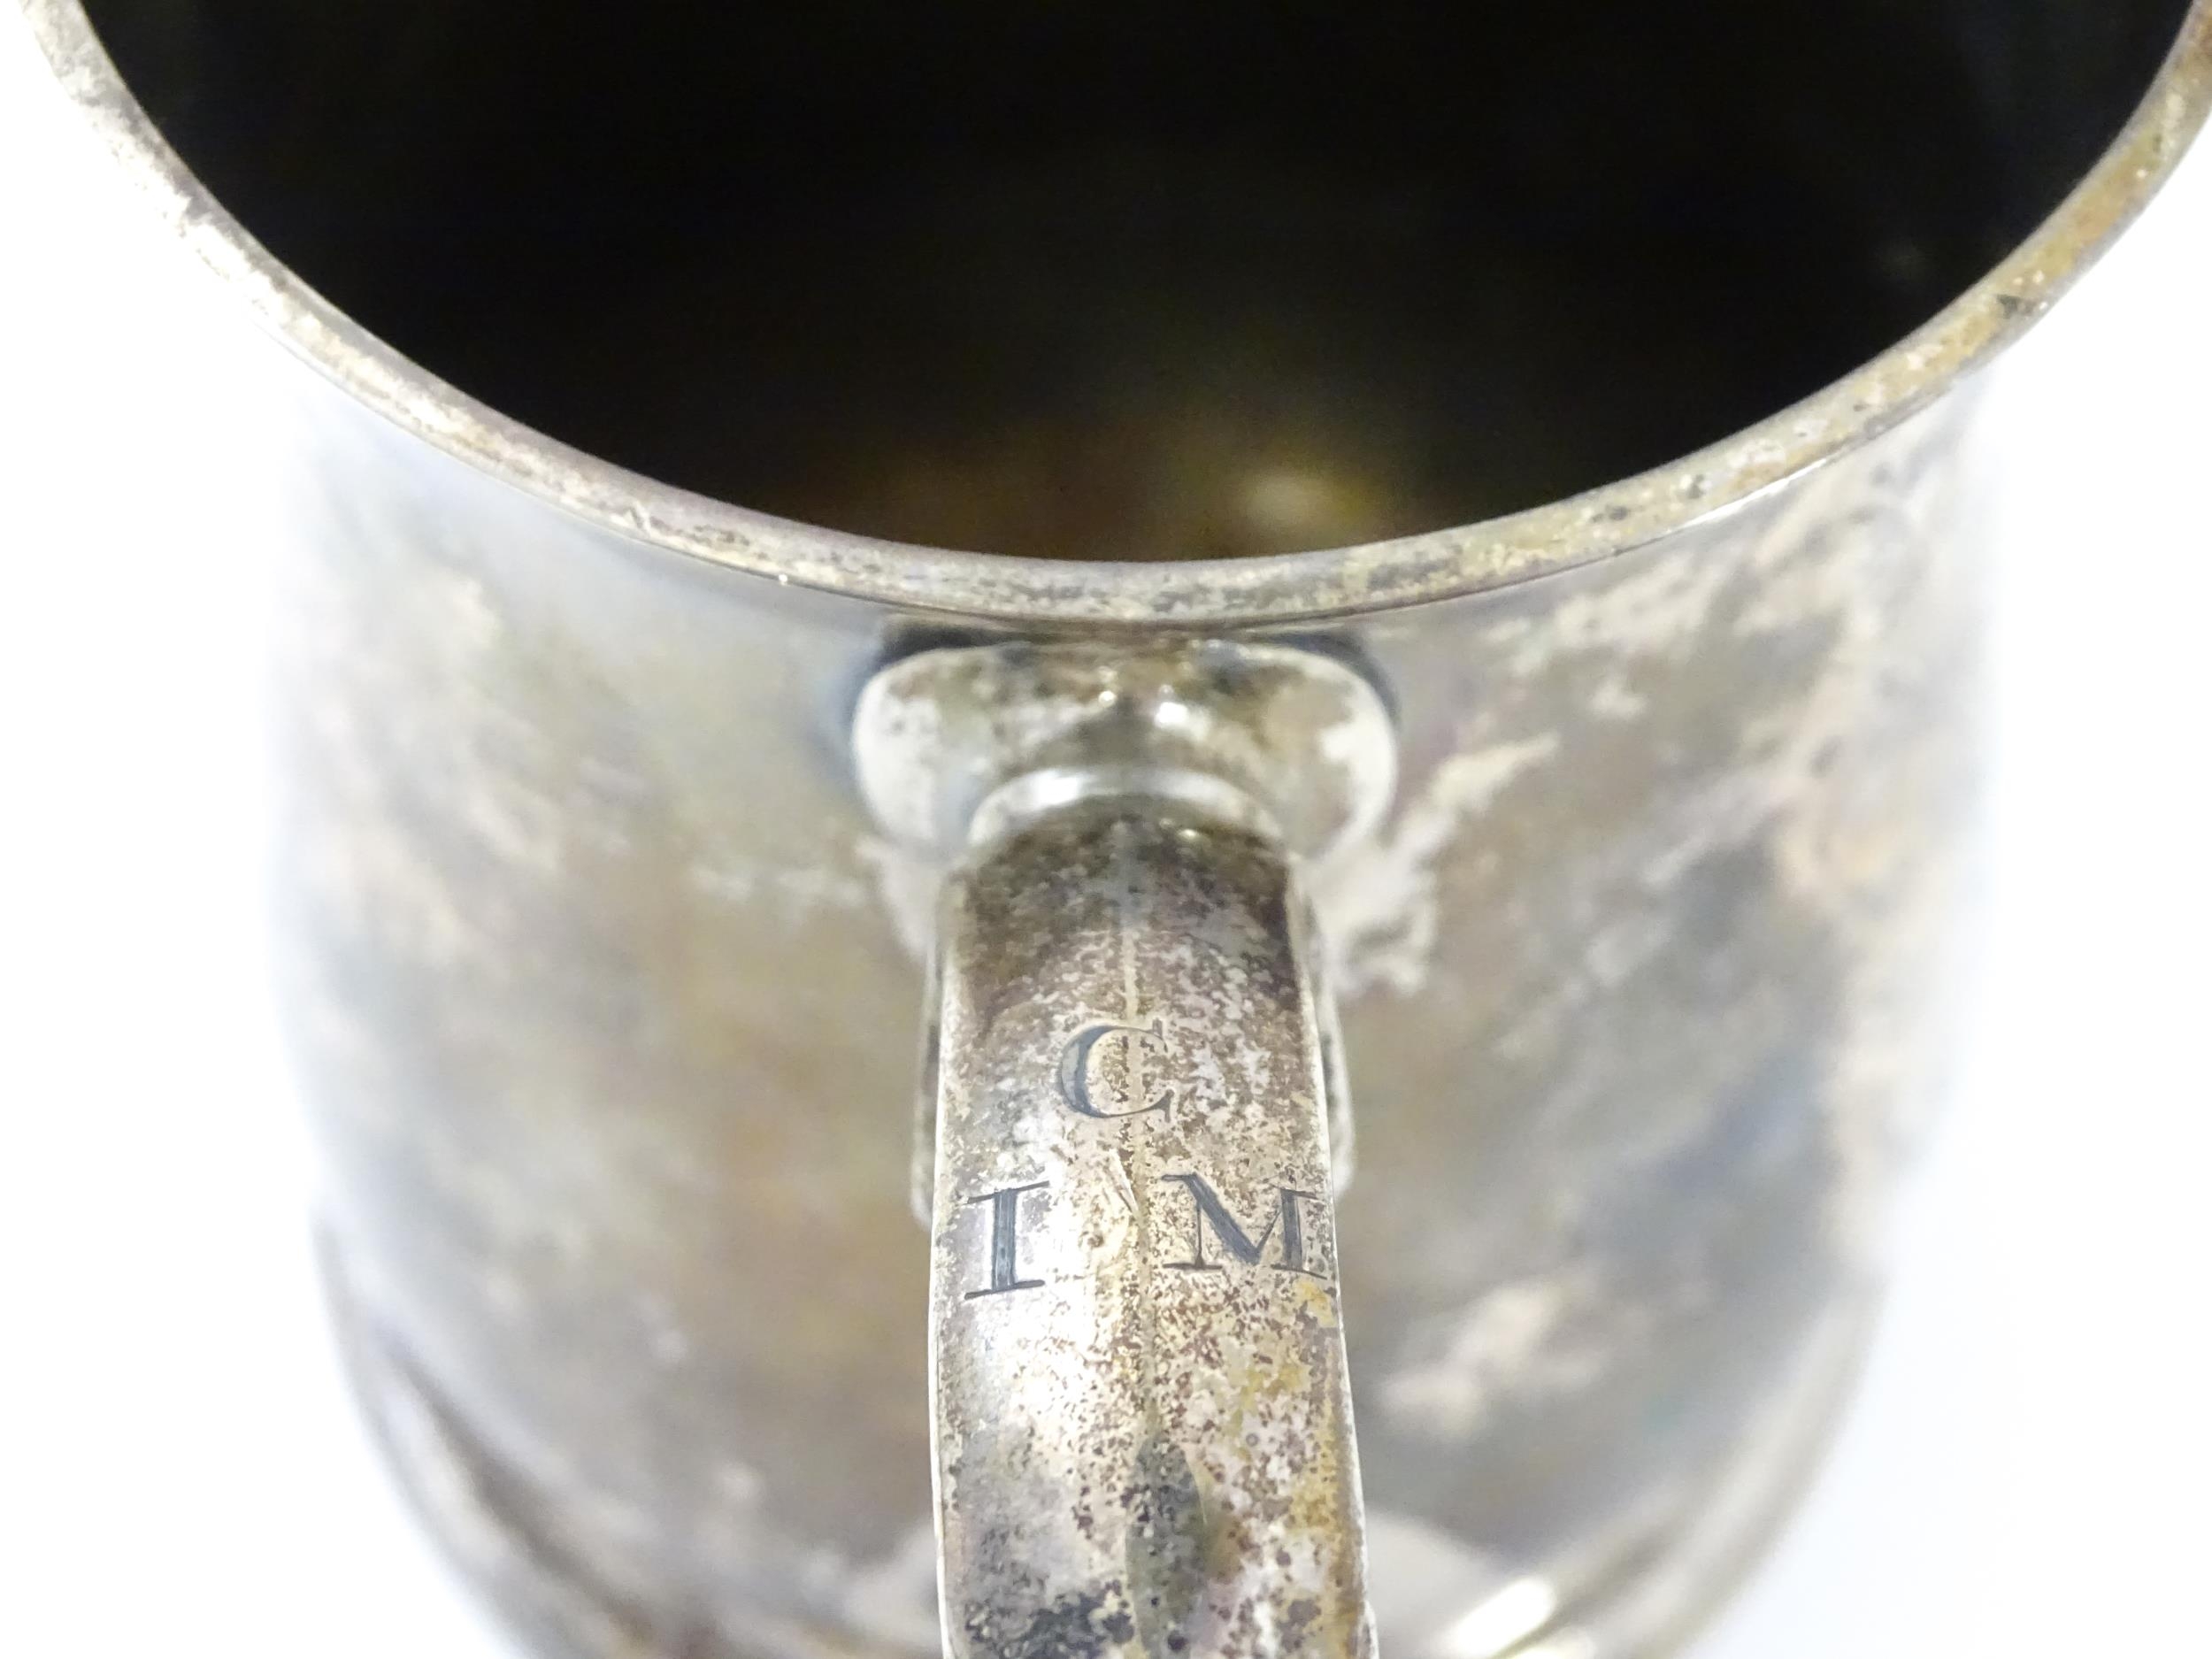 A Geo II silver tankard / mug with engraved heraldic armorial coat of arms decoration hallmarked - Image 10 of 11